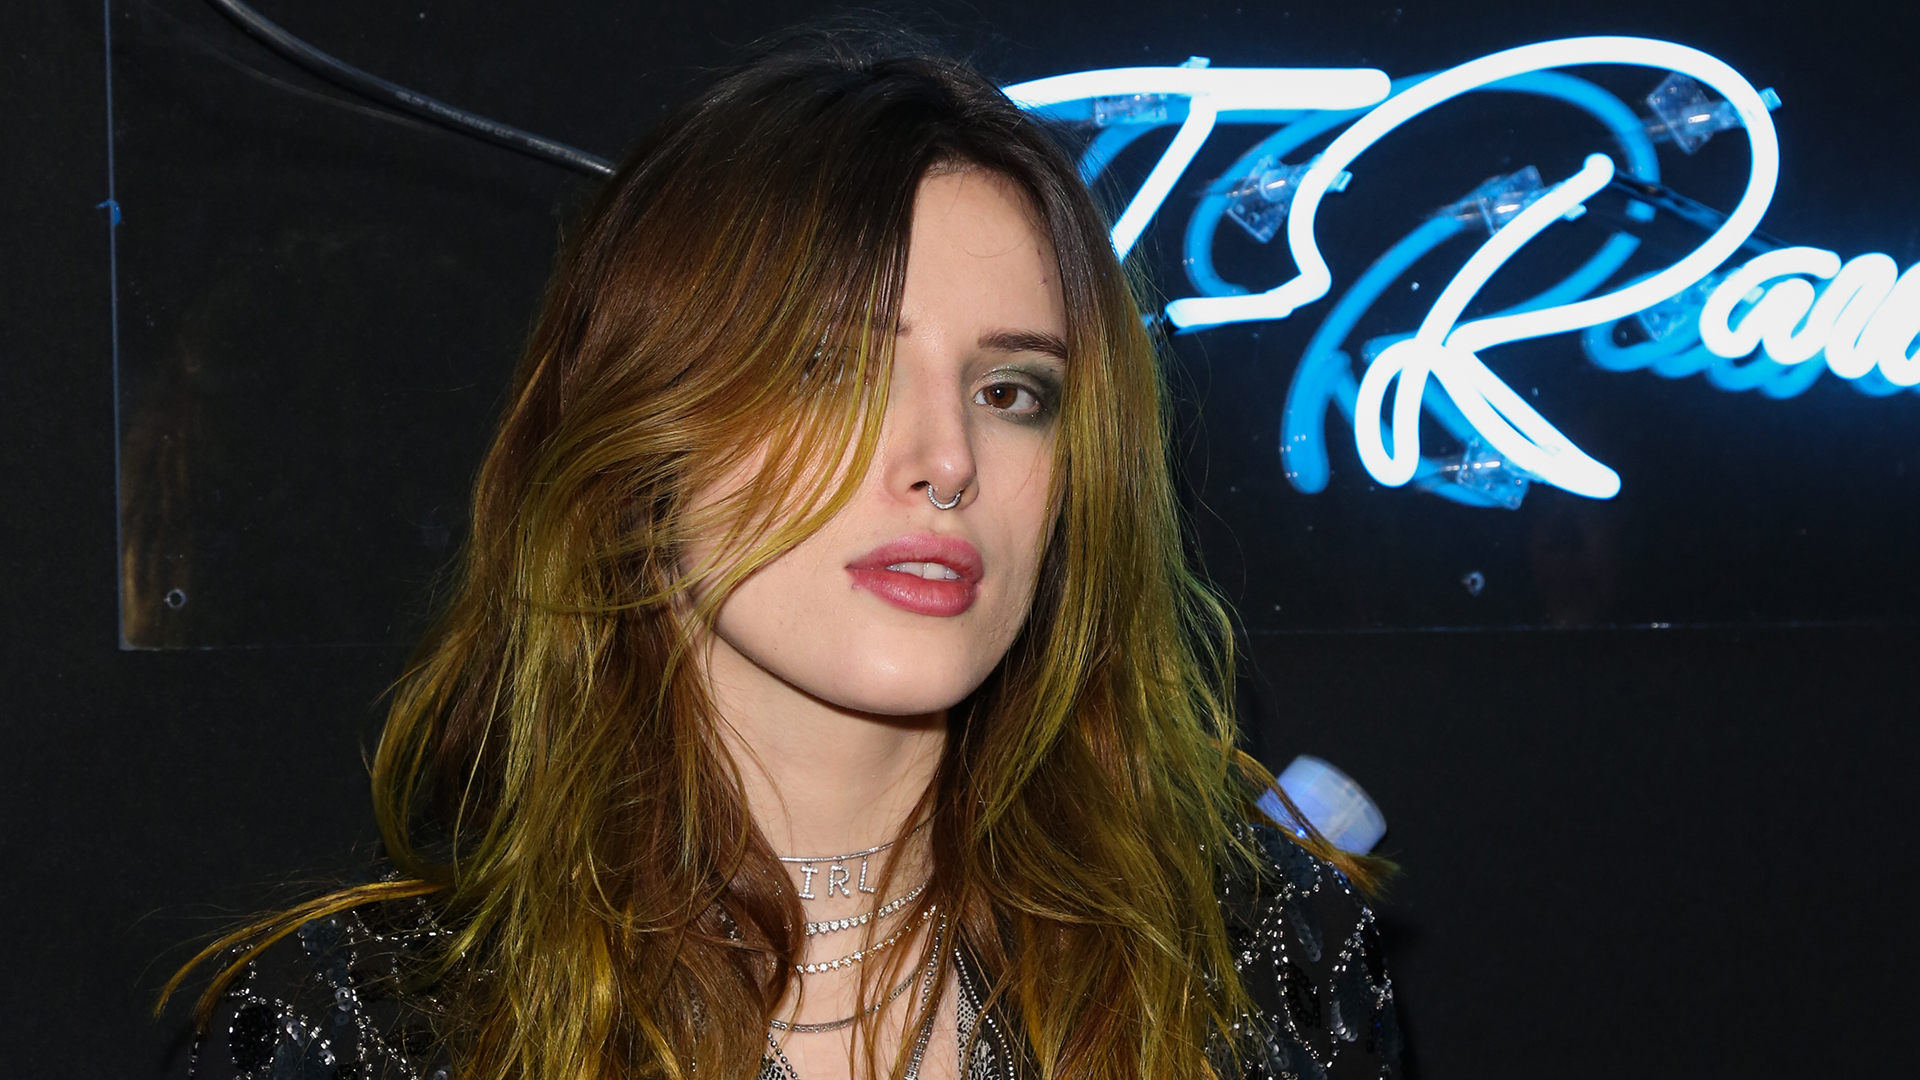 Bella Thorne Weight Loss Photo. Why She Struggles to Gain Weight